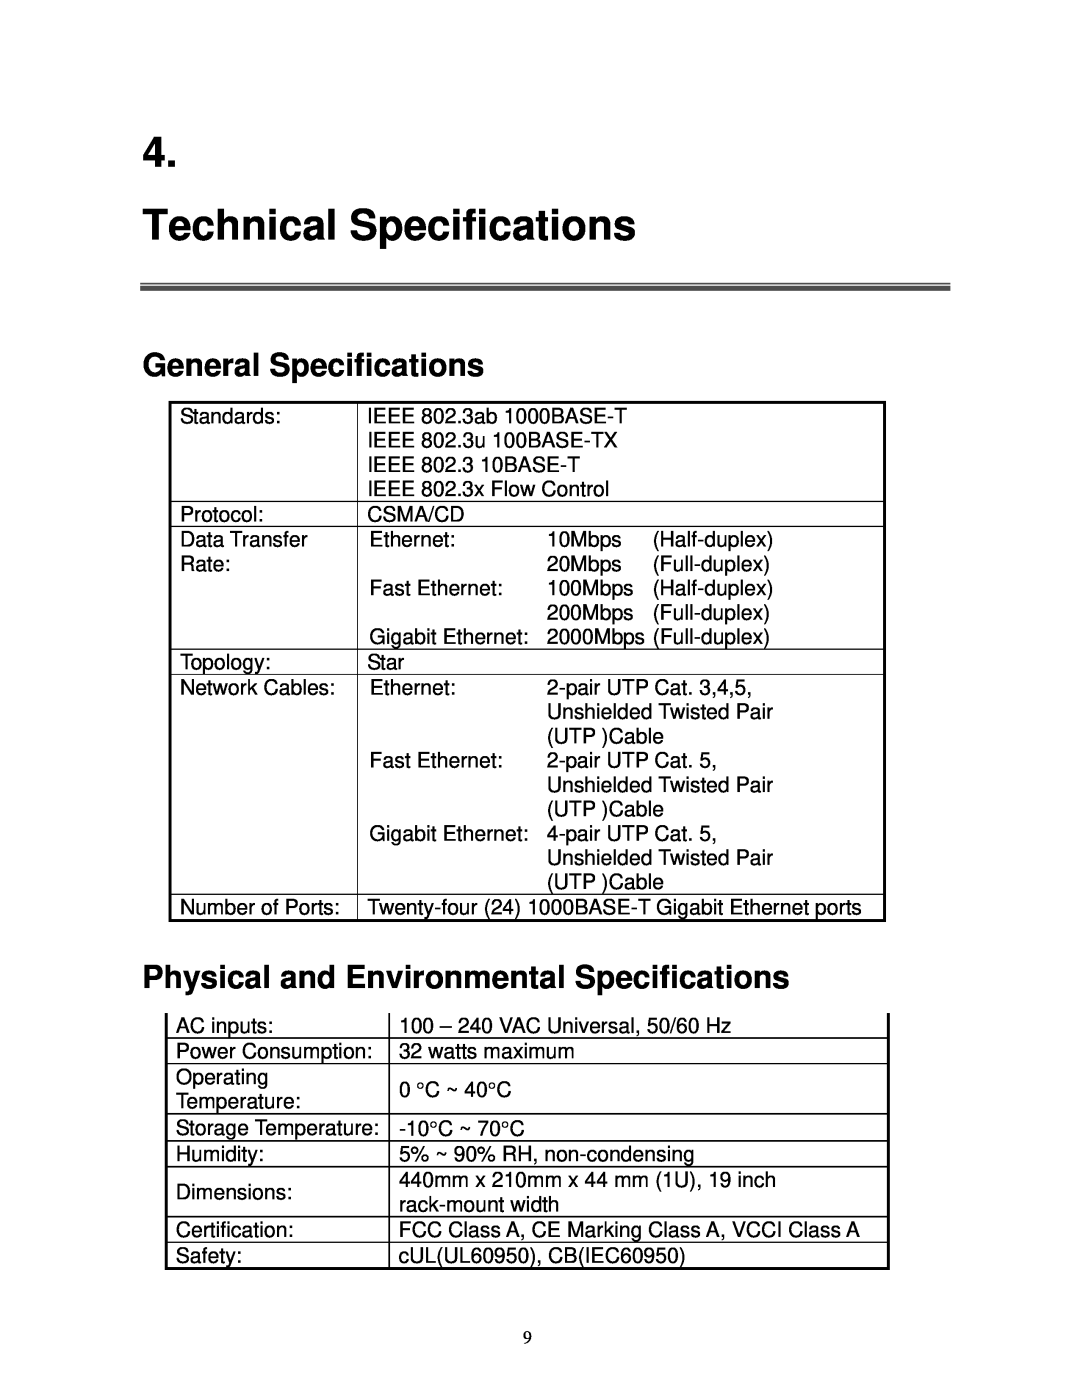 Milan Technology MIL-S24000T Technical Specifications, General Specifications, Physical and Environmental Specifications 